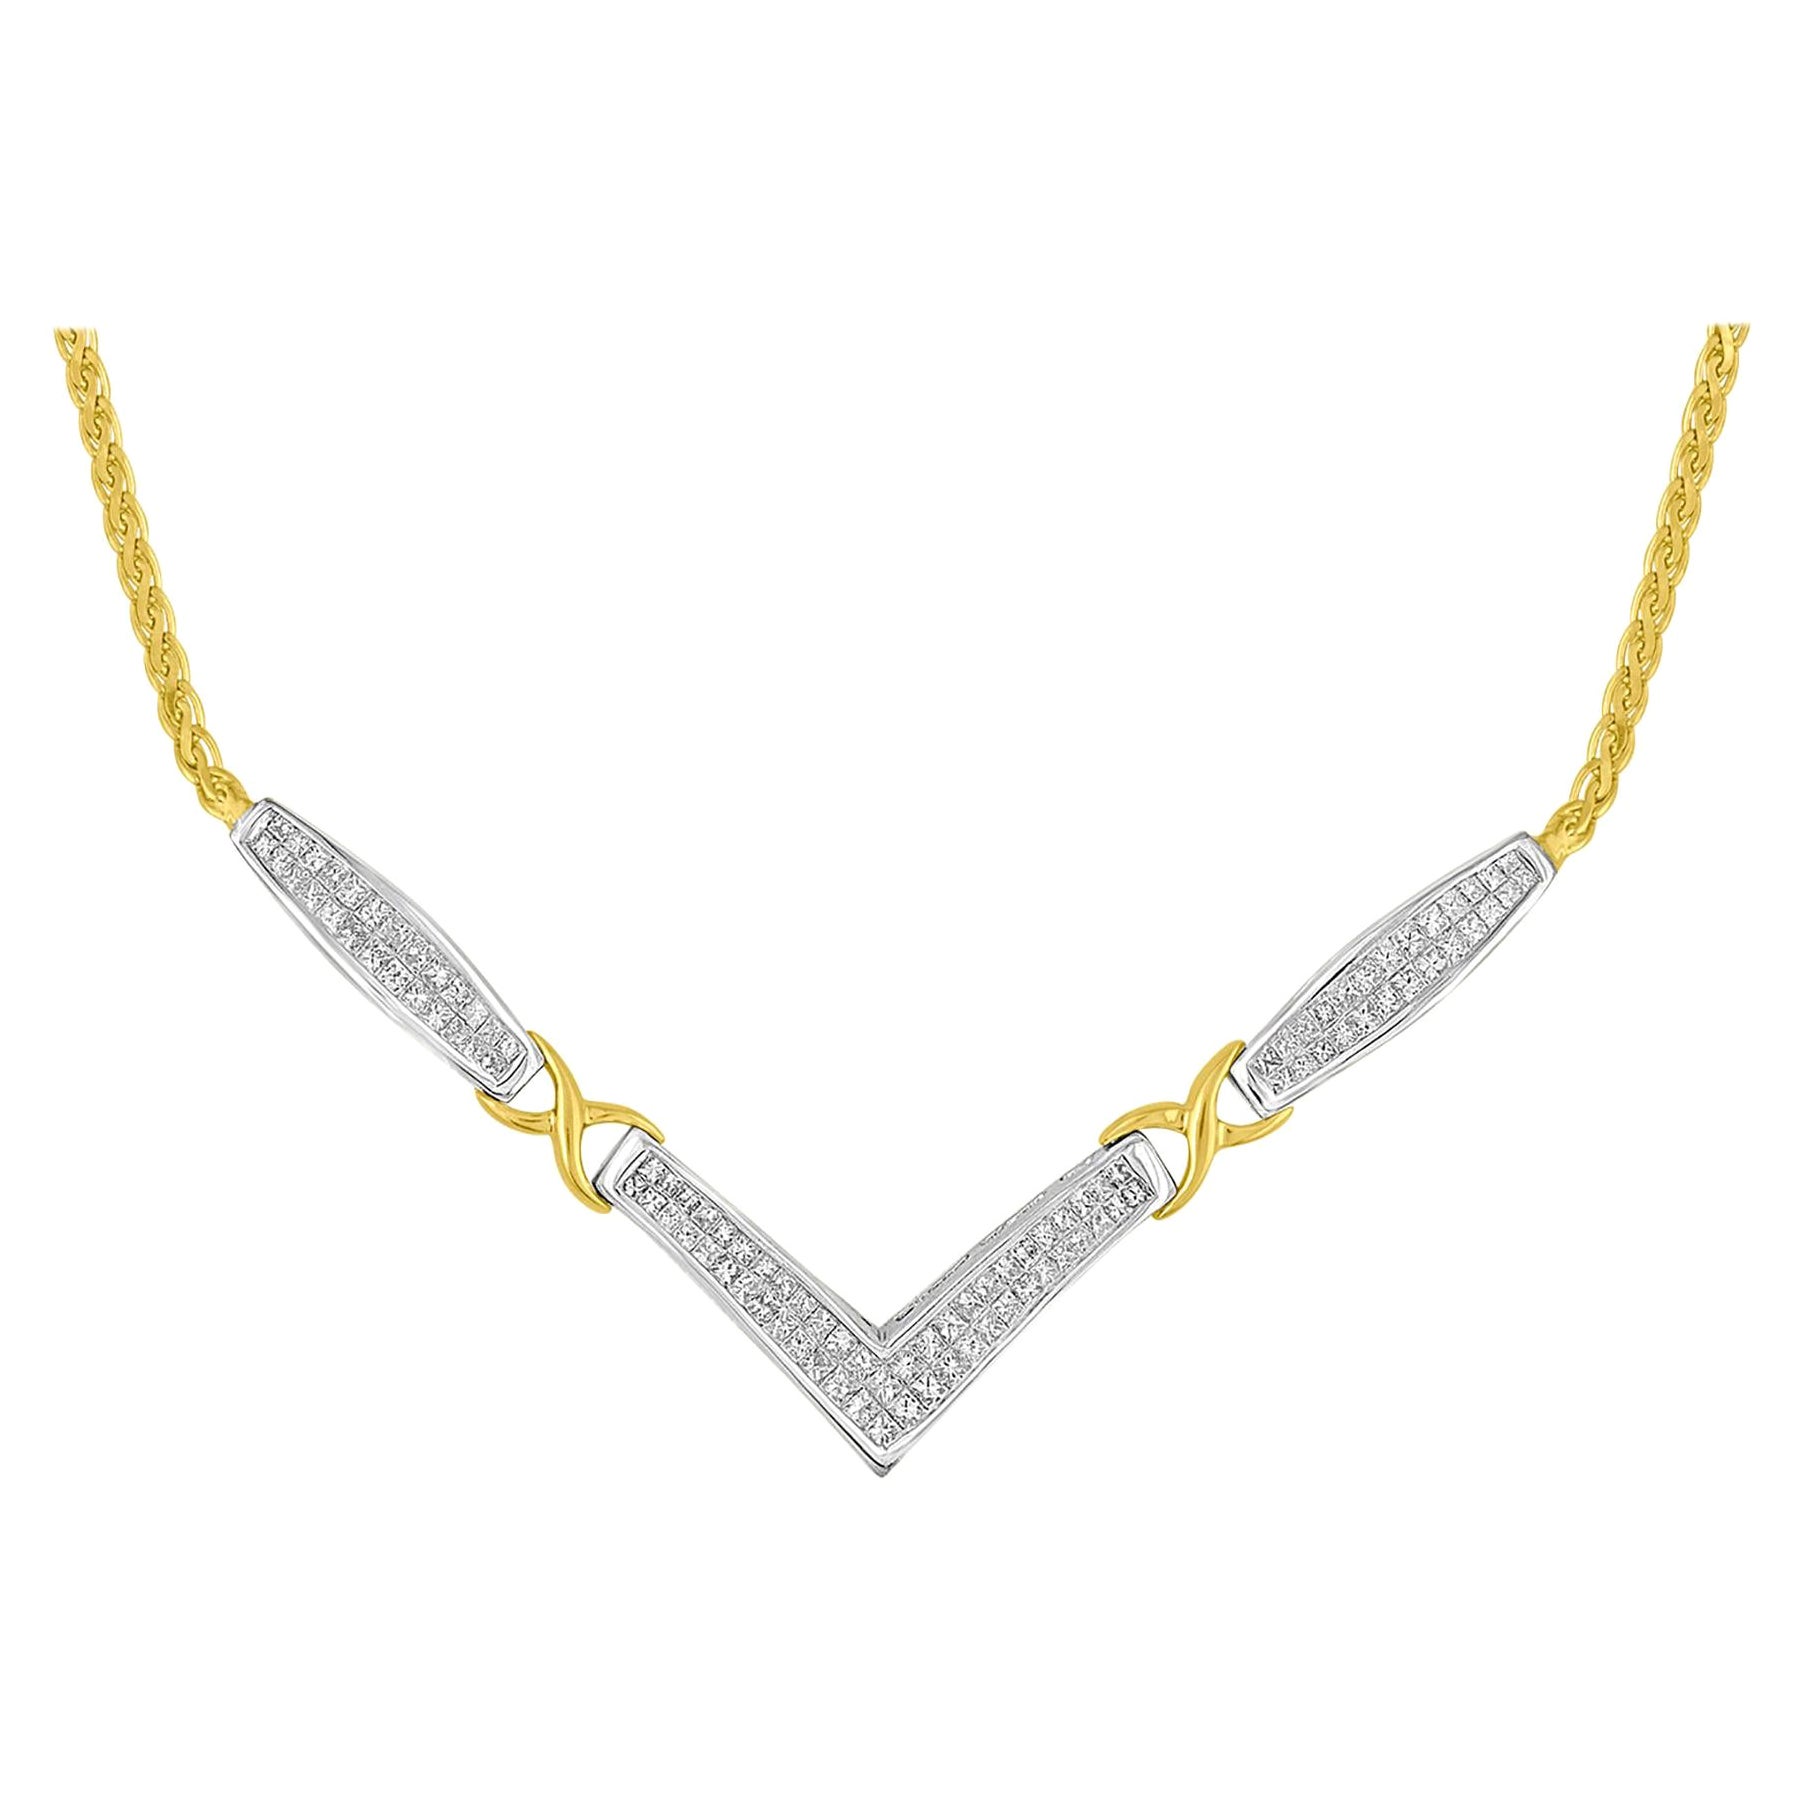 14k Yellow and White Gold 2.0 Carat Diamond "V" Shape Statement Necklace For Sale